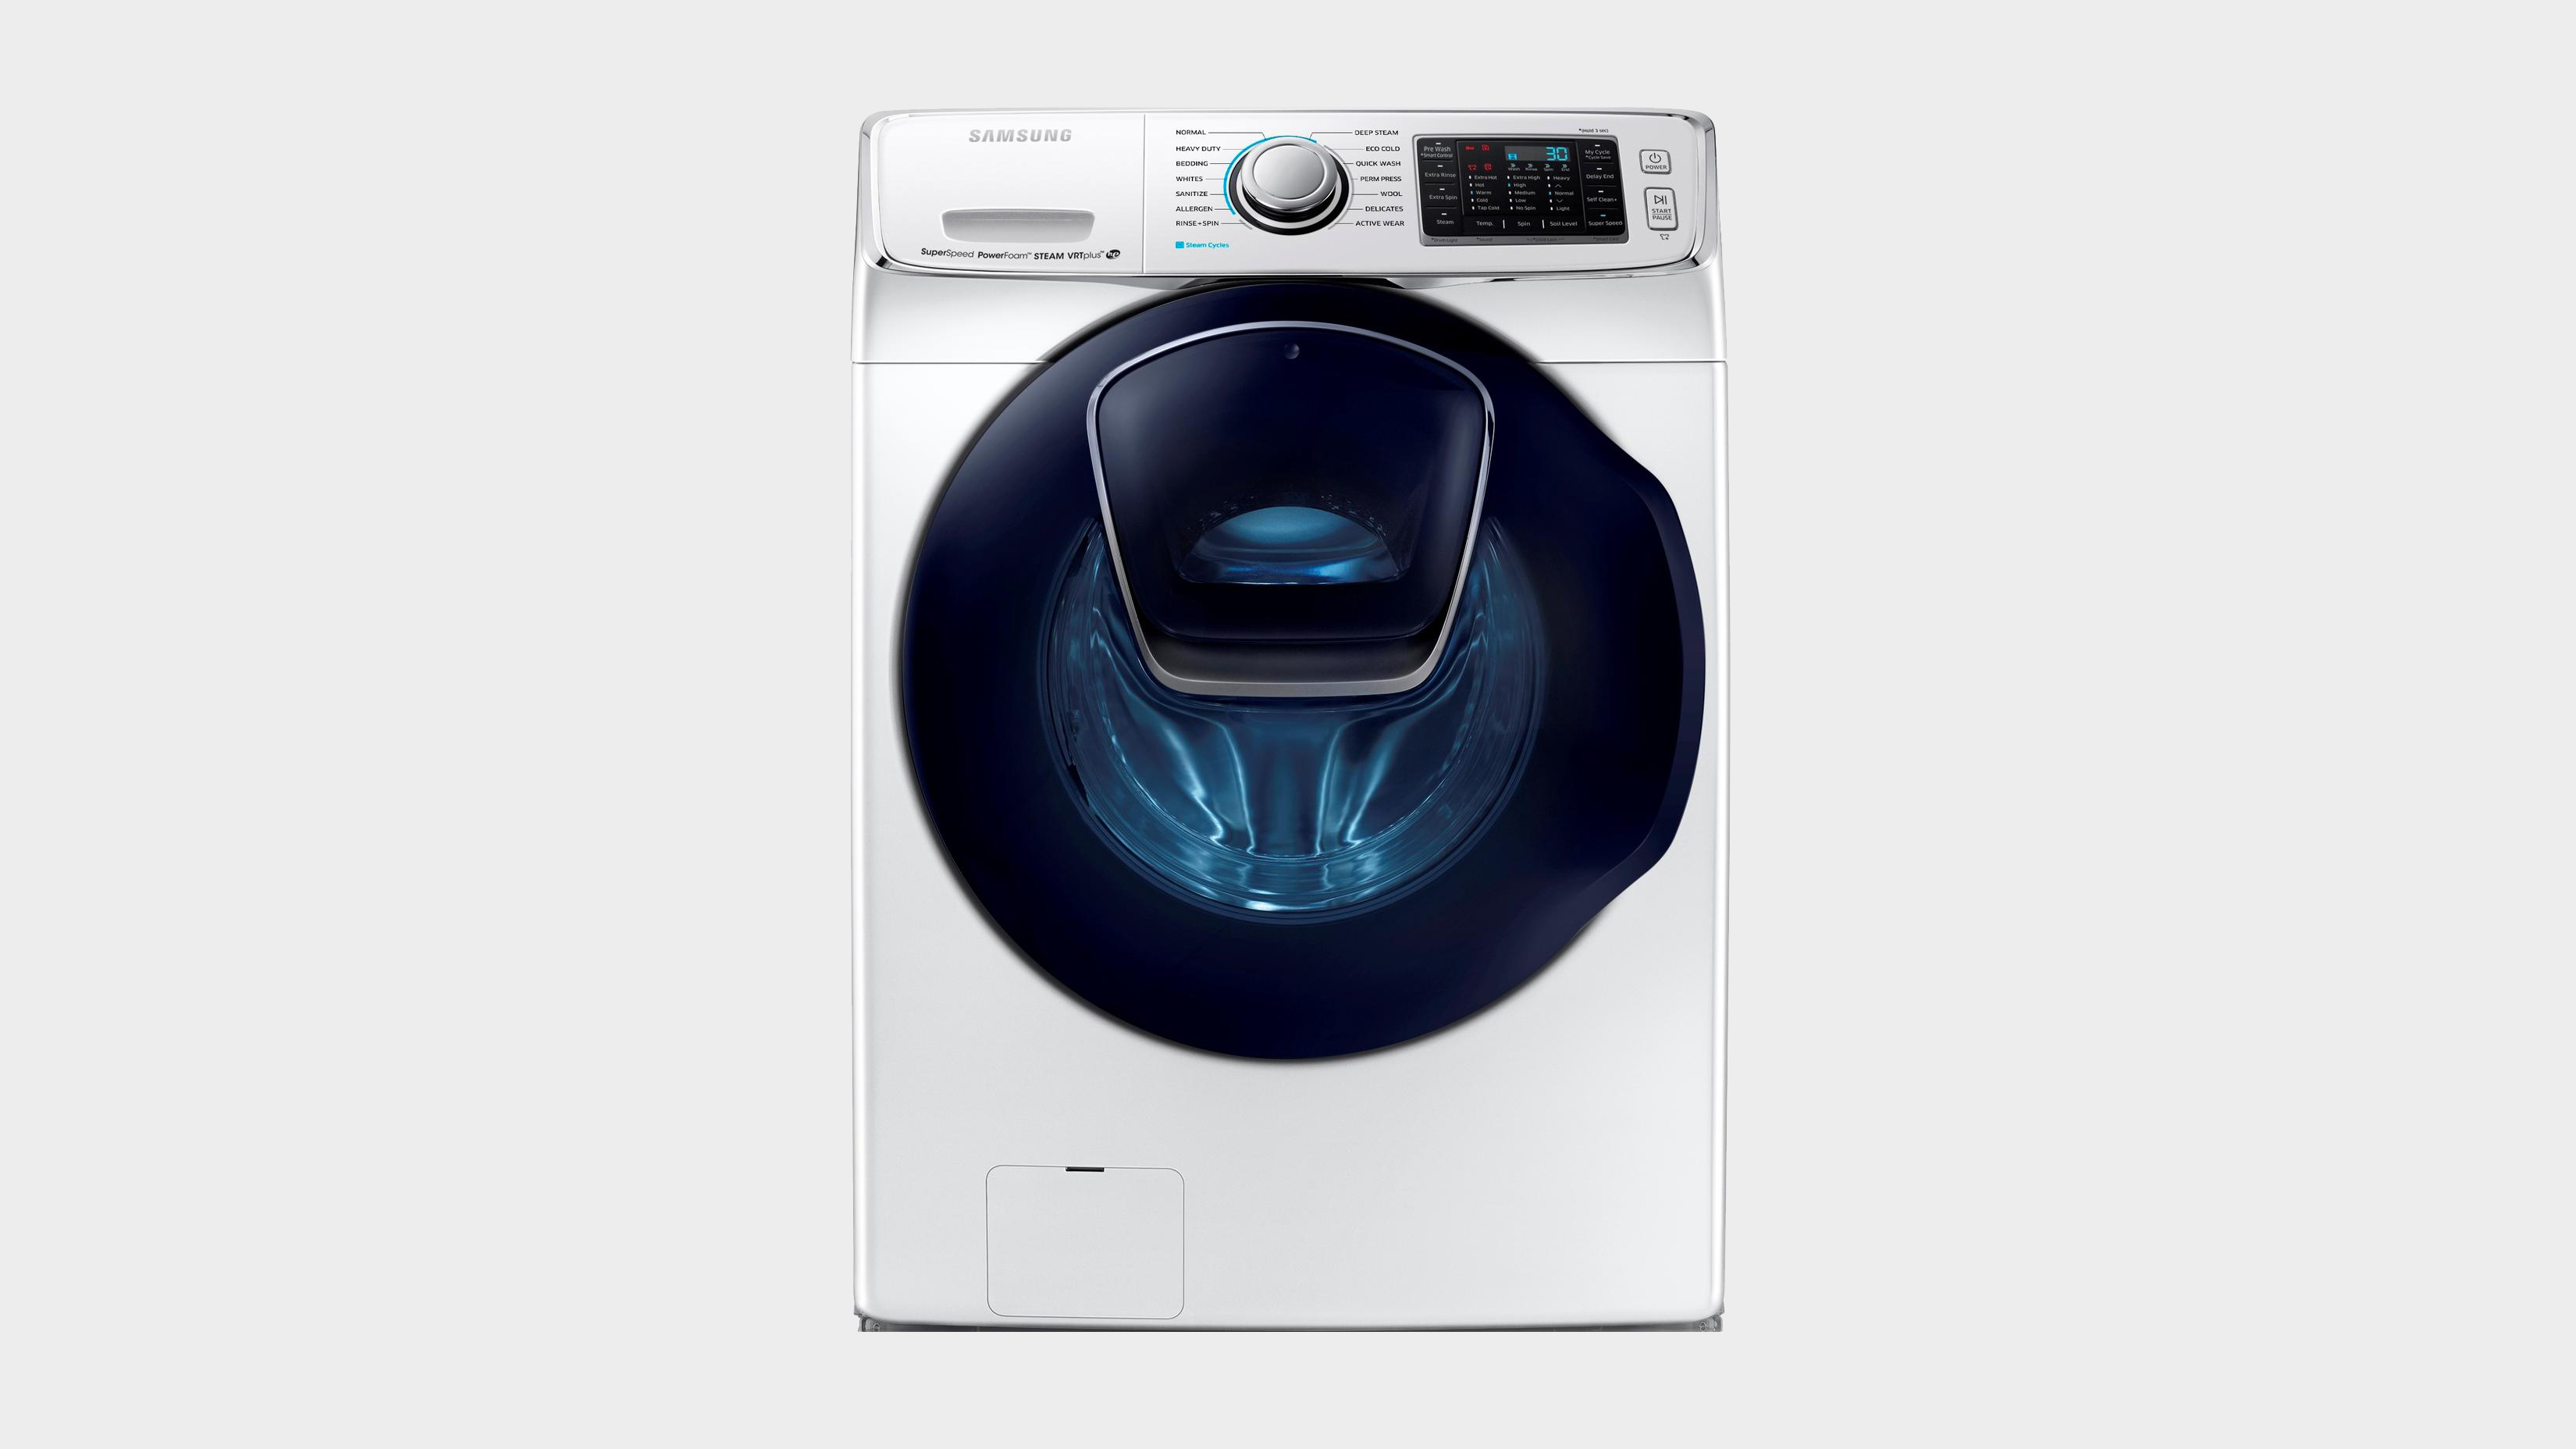 Best front load washers: Samsung WF50K7500AW Front Load Washer Review